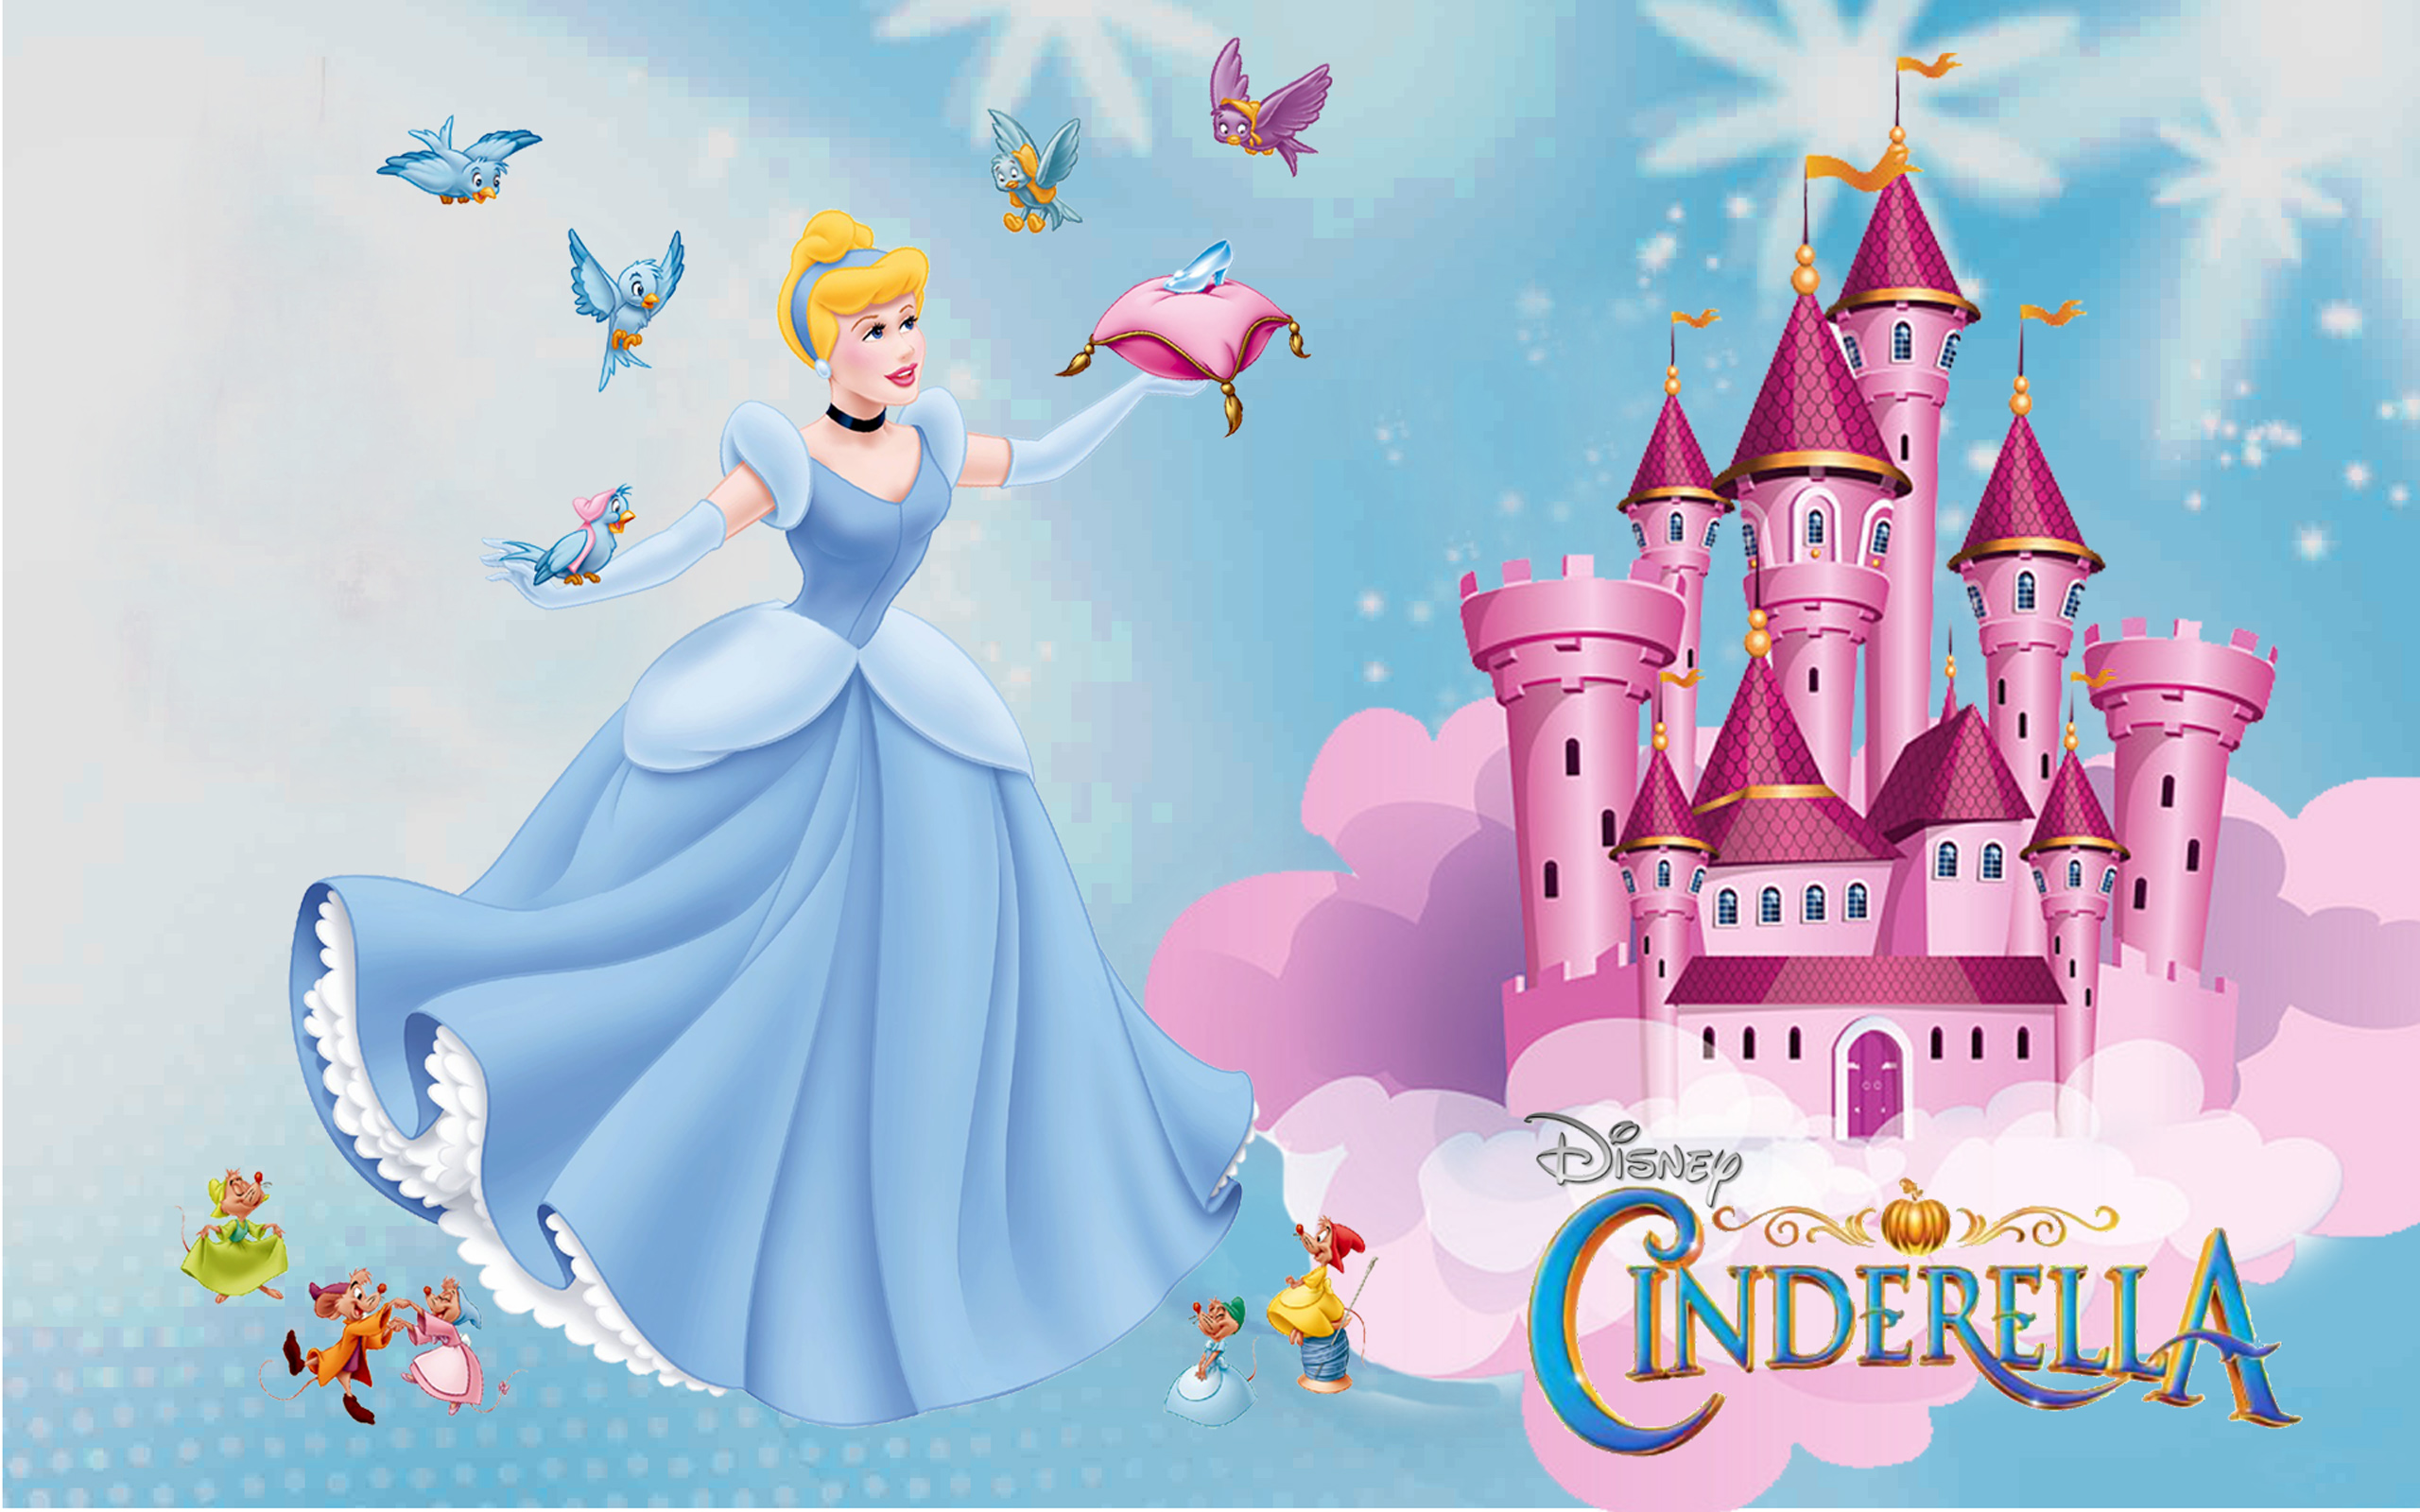 Download Castle Of Princess Cinderella Friends Jaq Gus Mary And Mouse Perla...